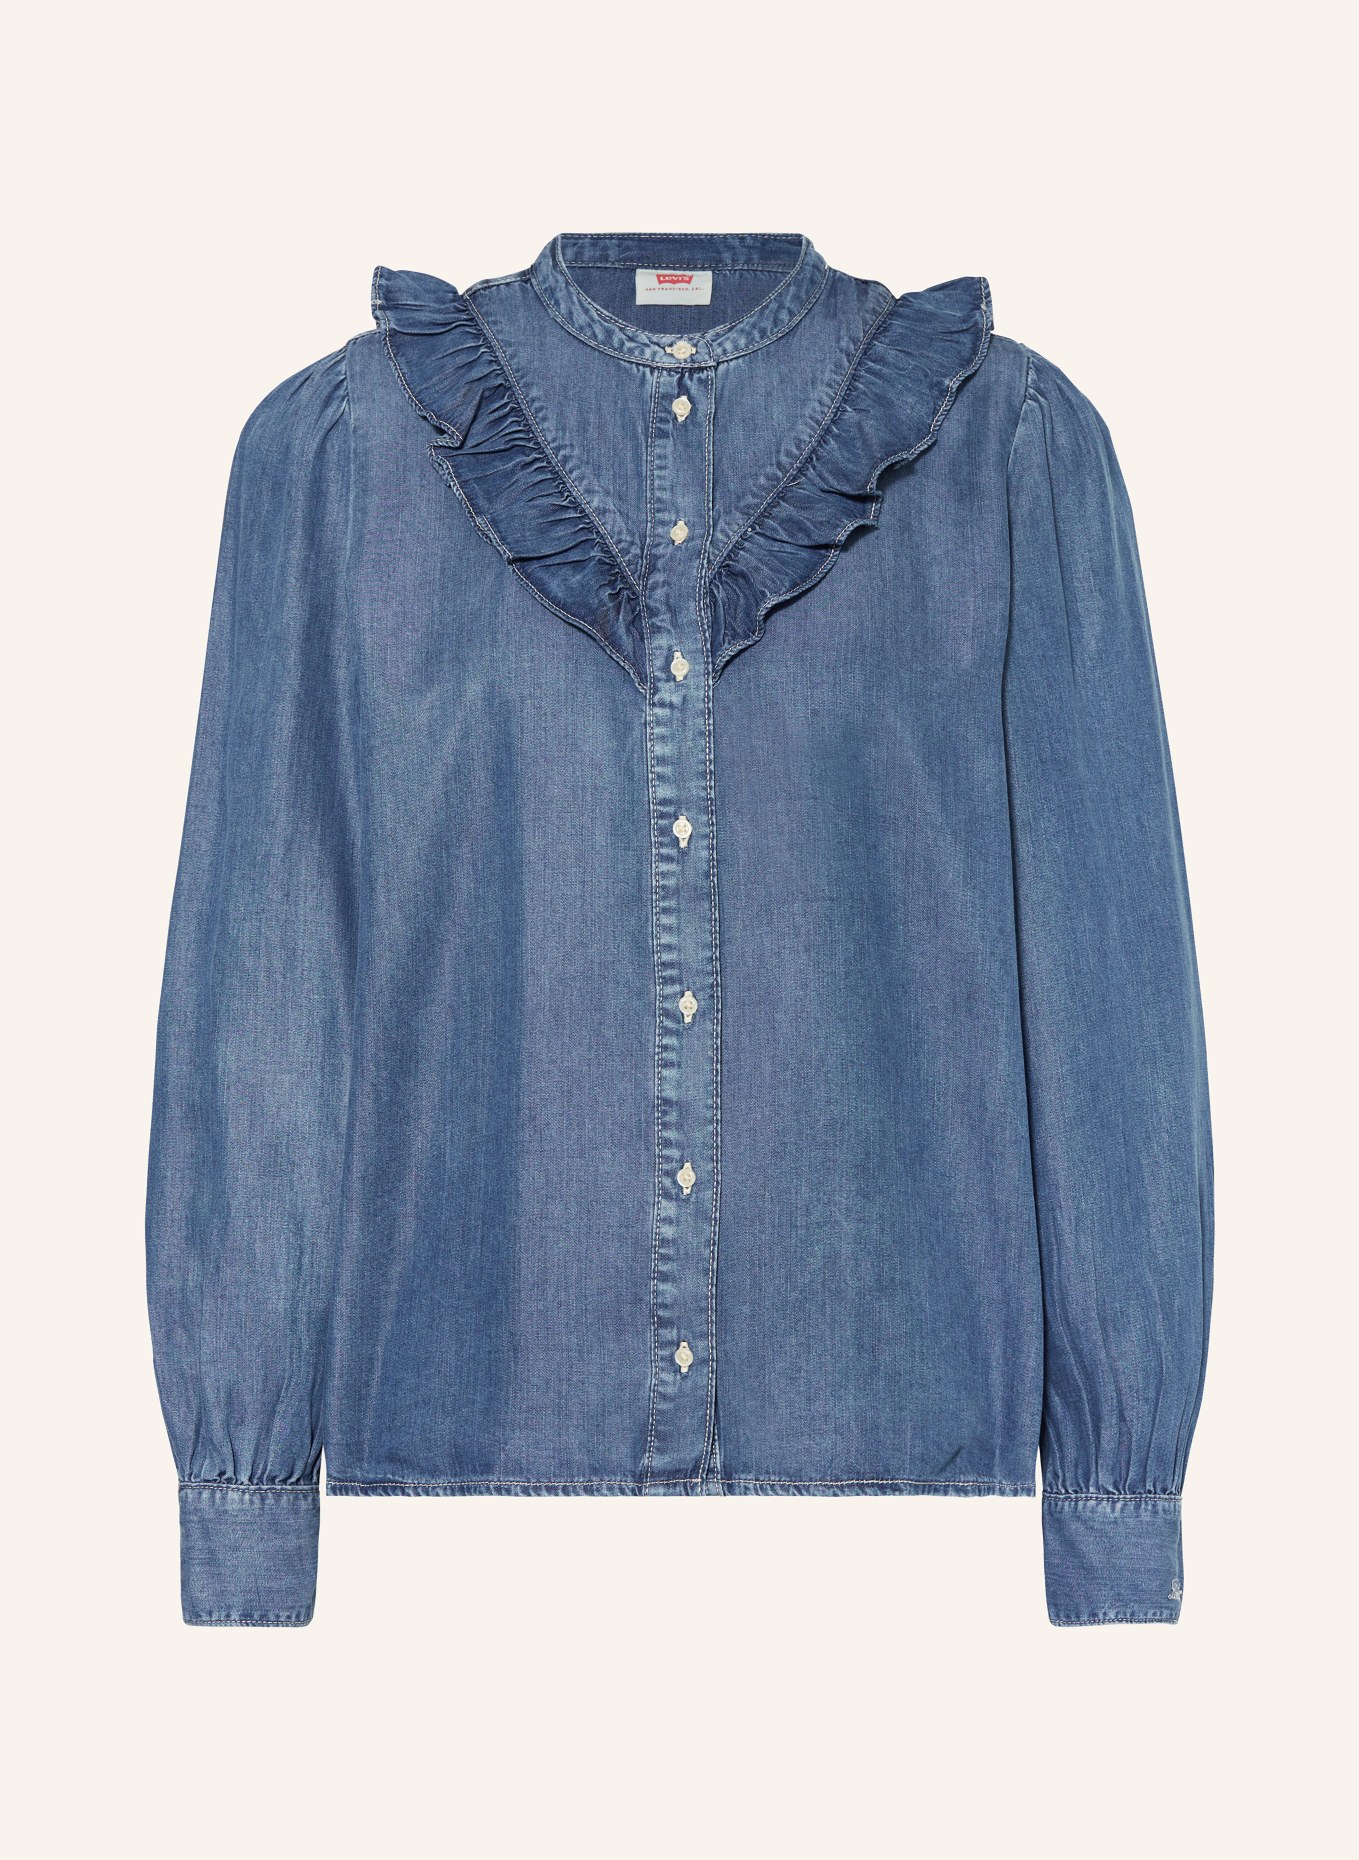 Levi's® Blouse CARINNA in denim look with ruffles, Color: BLUE (Image 1)